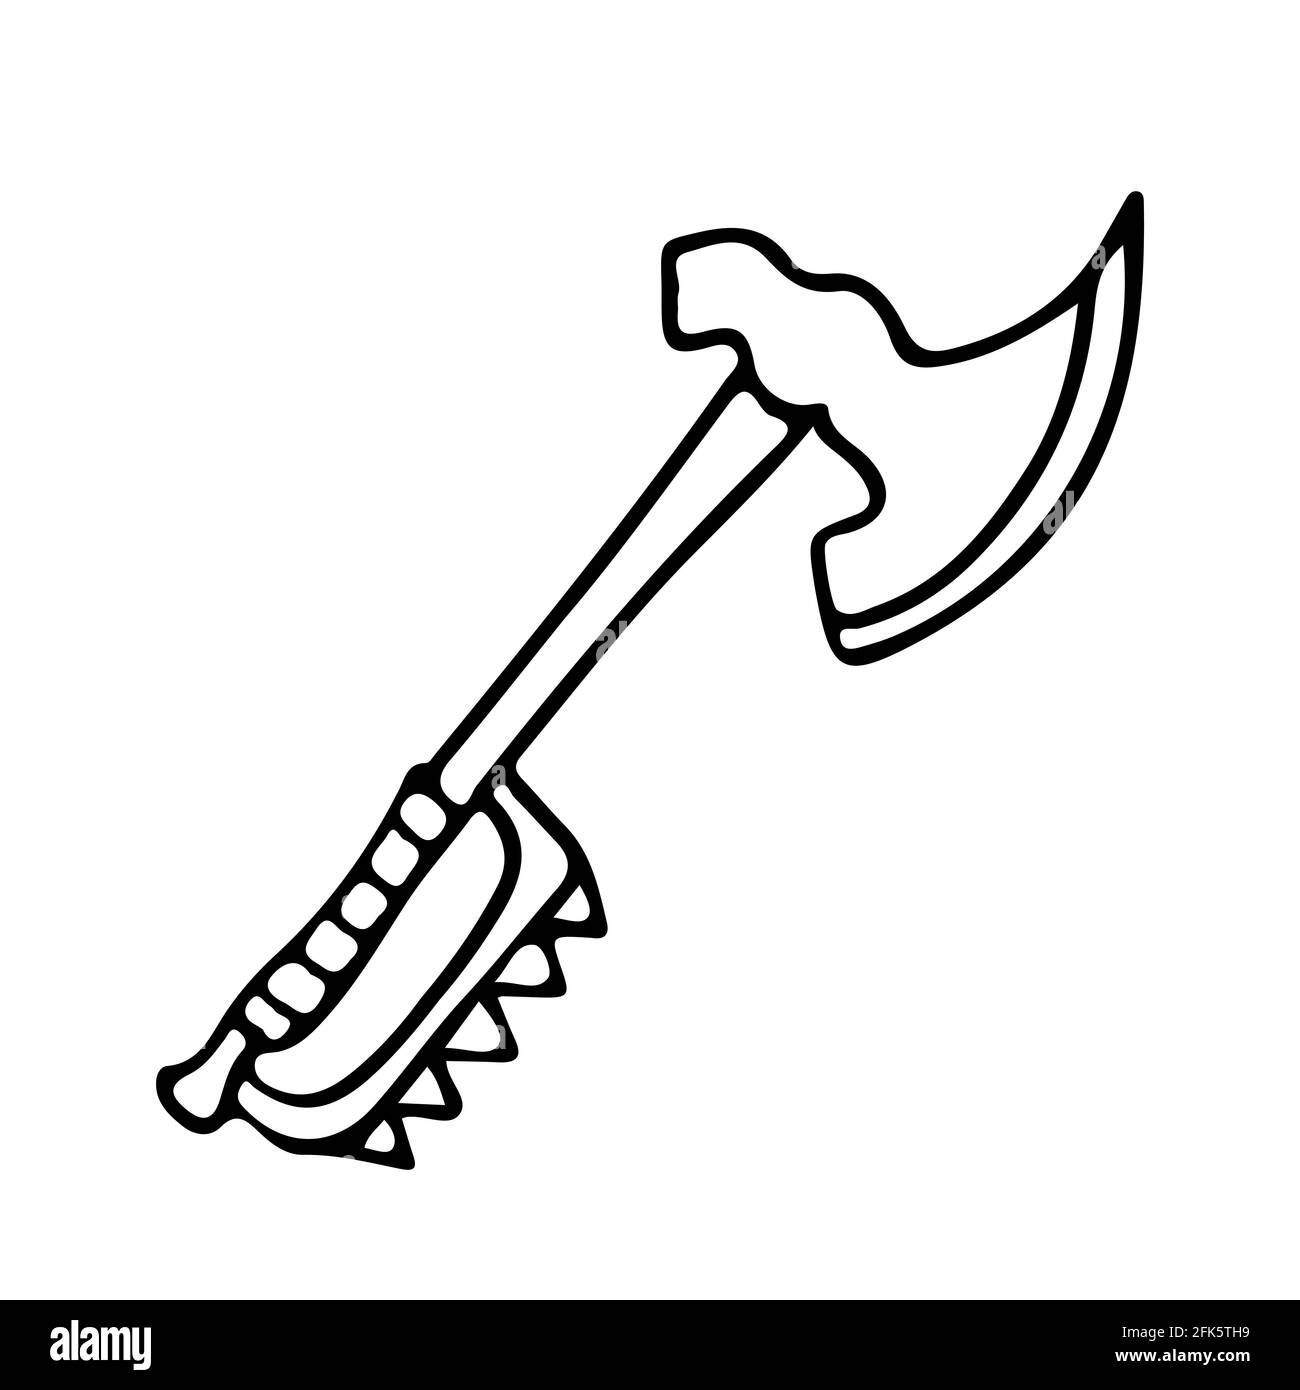 One-handed spiked axe in doodle style isolated Stock Vector